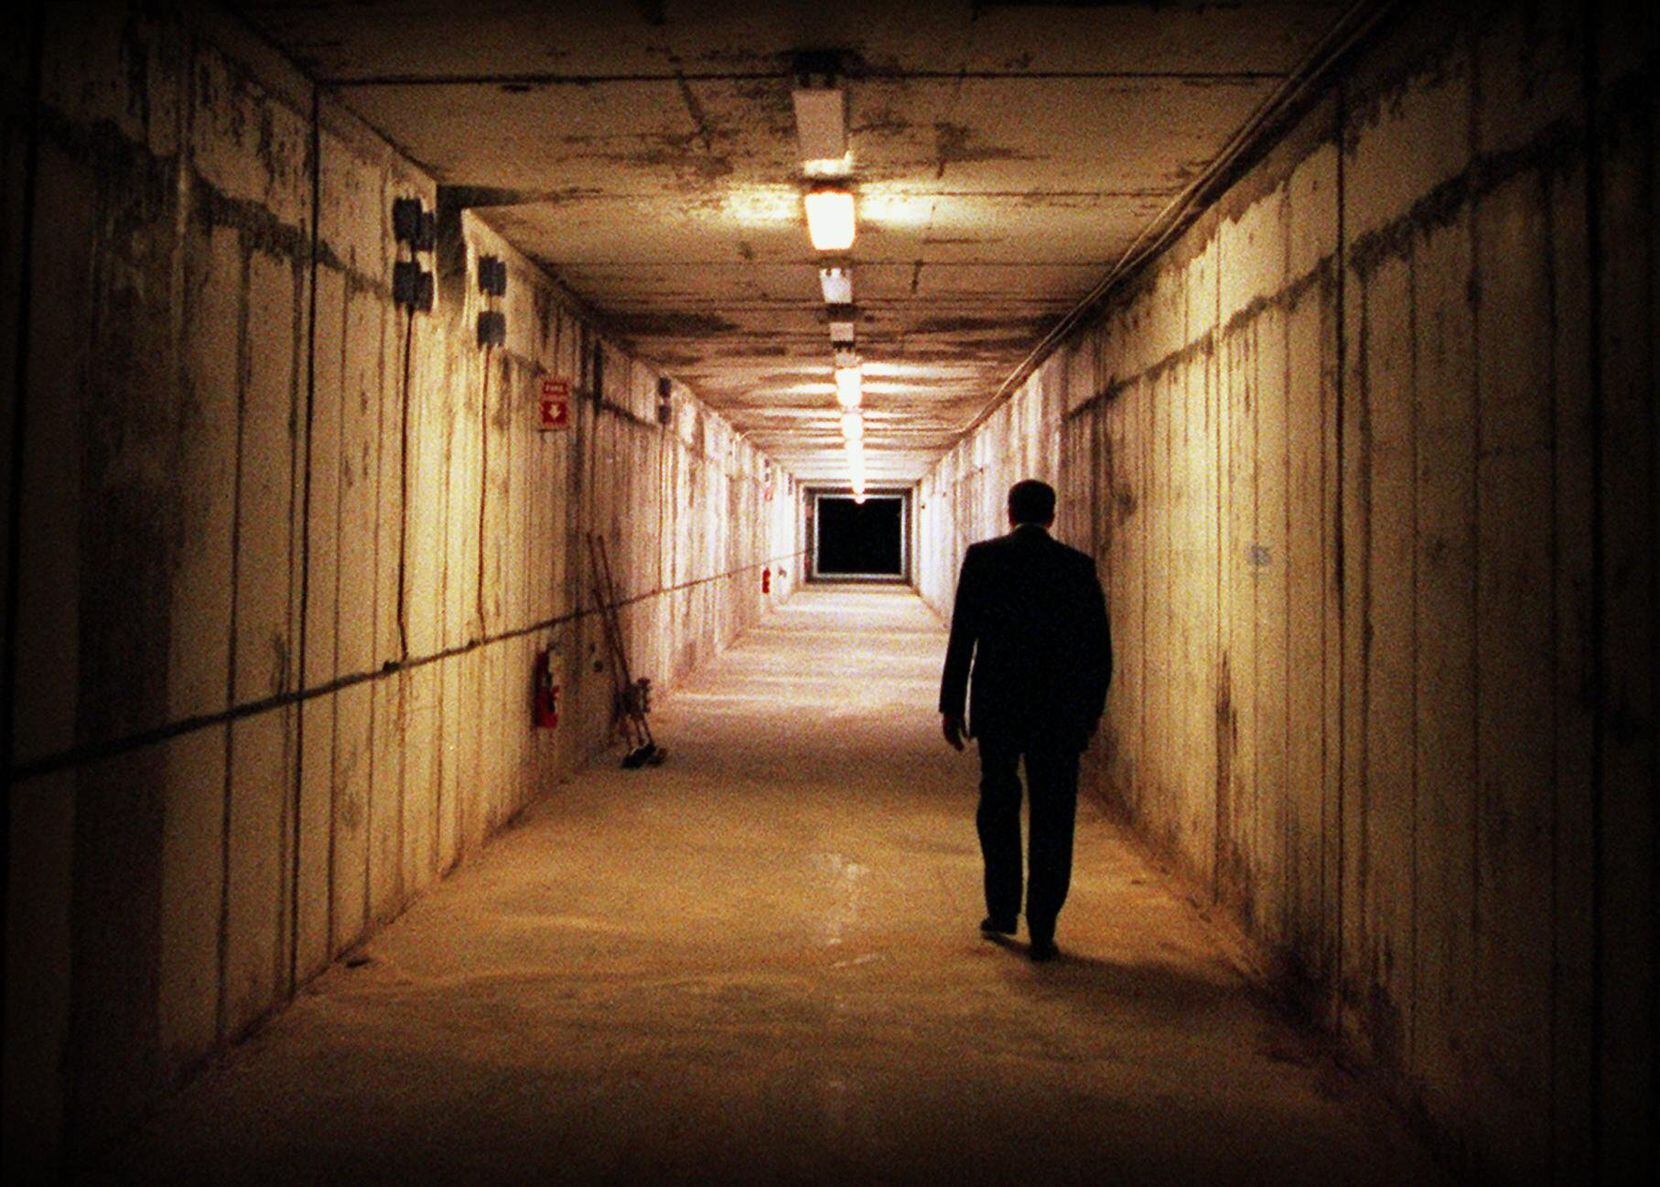 Texas General Land Office Facilities Manager J. Richard Fielder walks down the tunnel of the abandoned Super Collider in 2005.